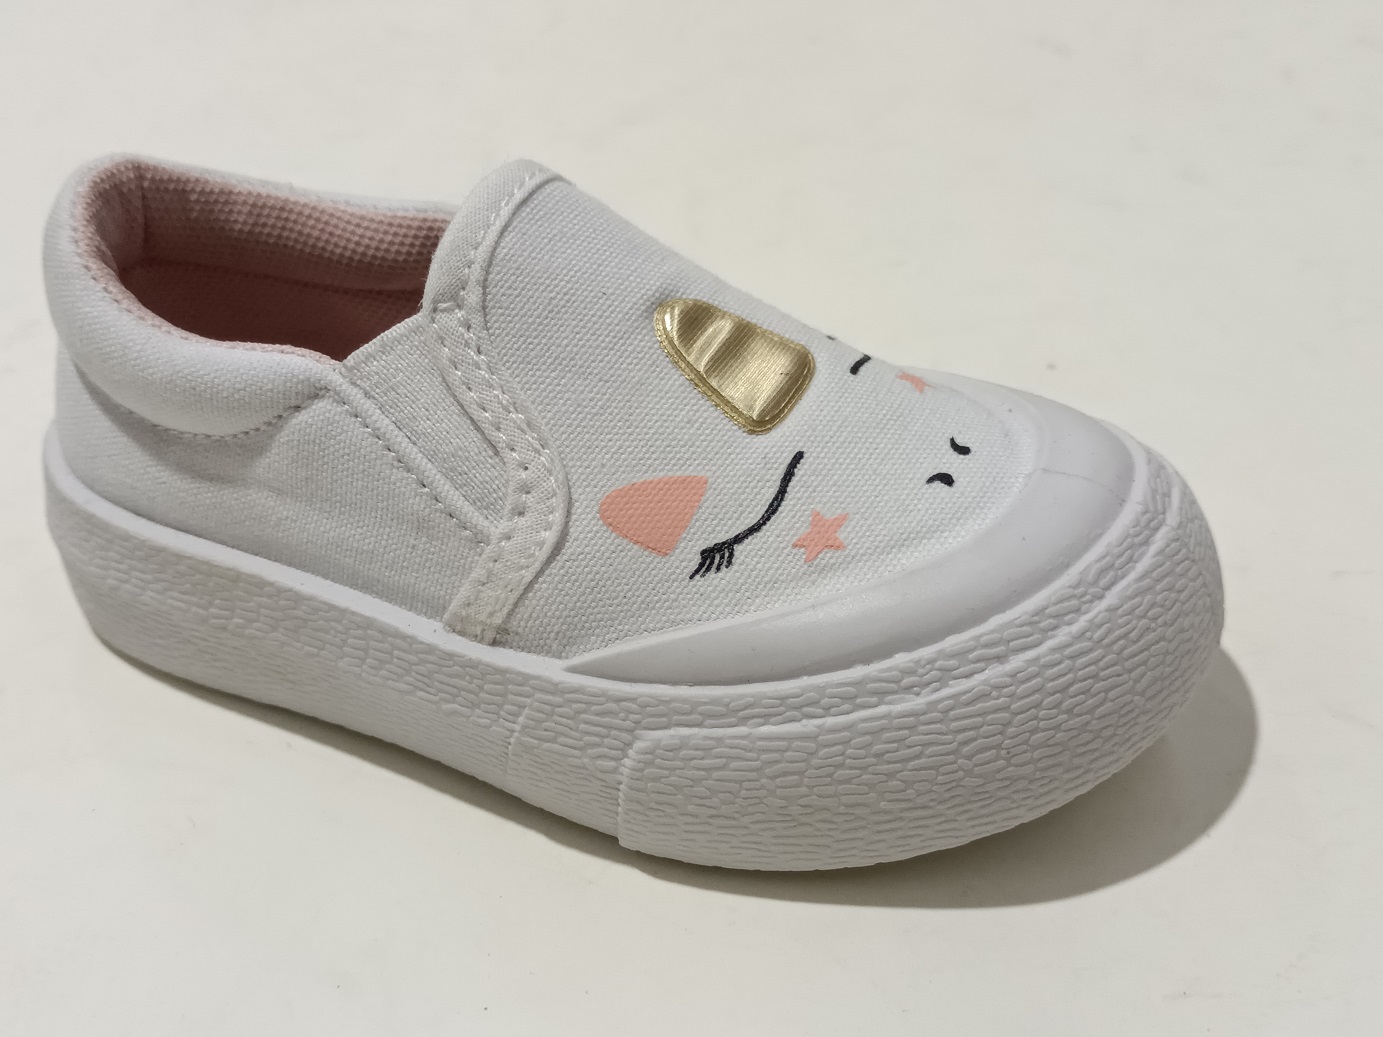 Girls Slip Ons Shoes Children's Comfort White Canvas Shoes Custom Injection Shoes for Children Daily Shoes